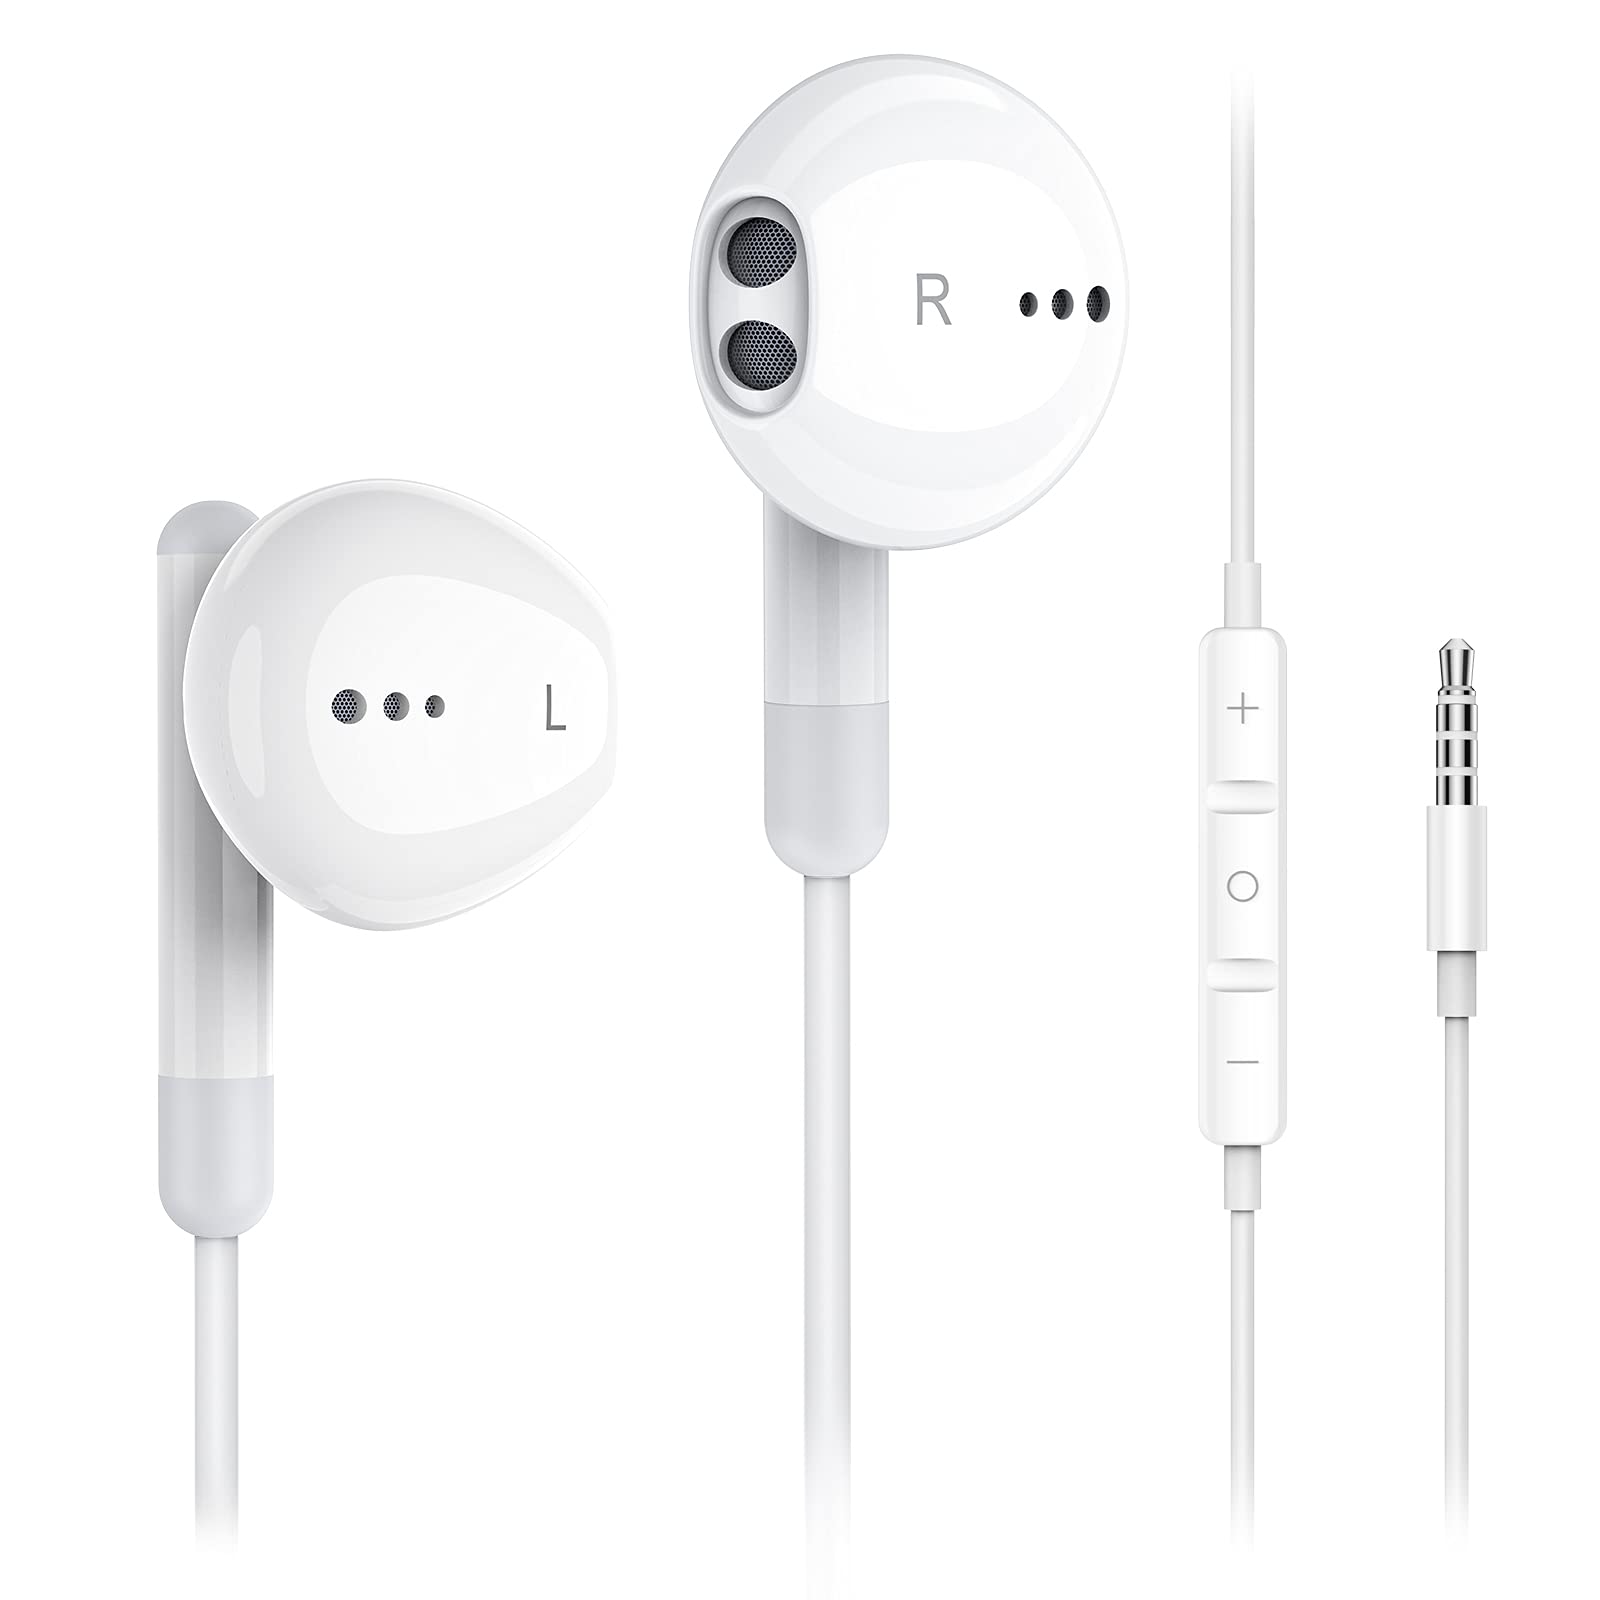  Kimwood Wired Earbuds with Microphone,  Wired Earphones in-Ear Headphones HiFi Stereo, Powerful Bass and Crystal Clear Audio, Compatible with iPhone, iPad, Android, Computer Most with 3.5mm Jack(Clear)...